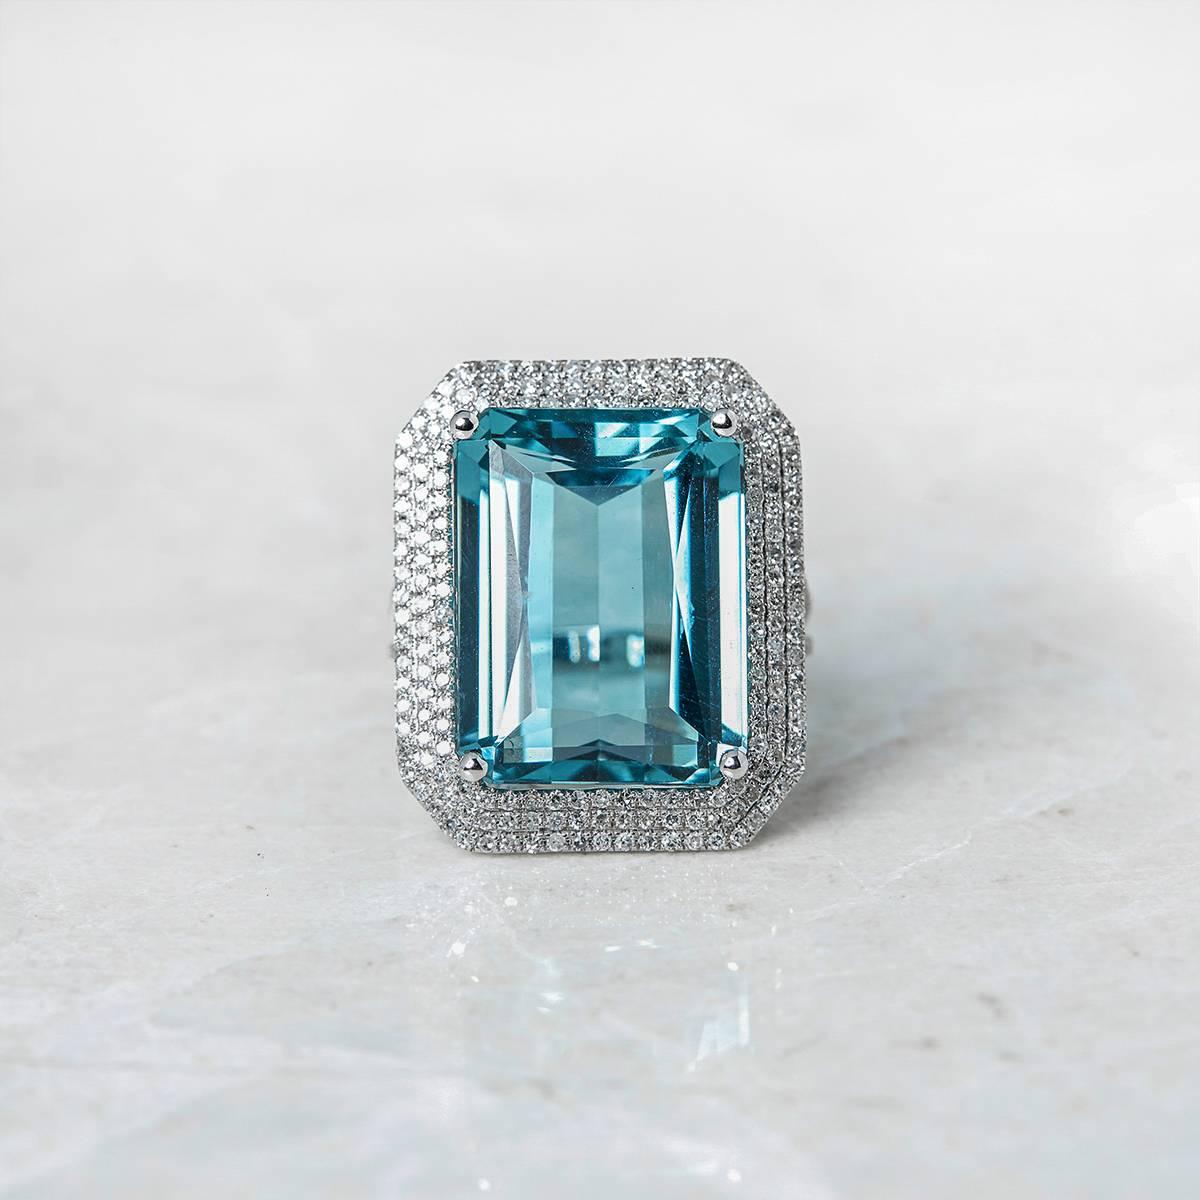 Ref:	COM458
Size:	 M.5
Box & Papers: Xupes Presentation Box
Material: 14k White Gold, total weight - 9.17 grams
Gemset: Set with 1 emerald Cut Aquamarine of 24.00ct with 3 rows of round brilliant cut Diamonds of 1.00ct total
Condition: 9 -